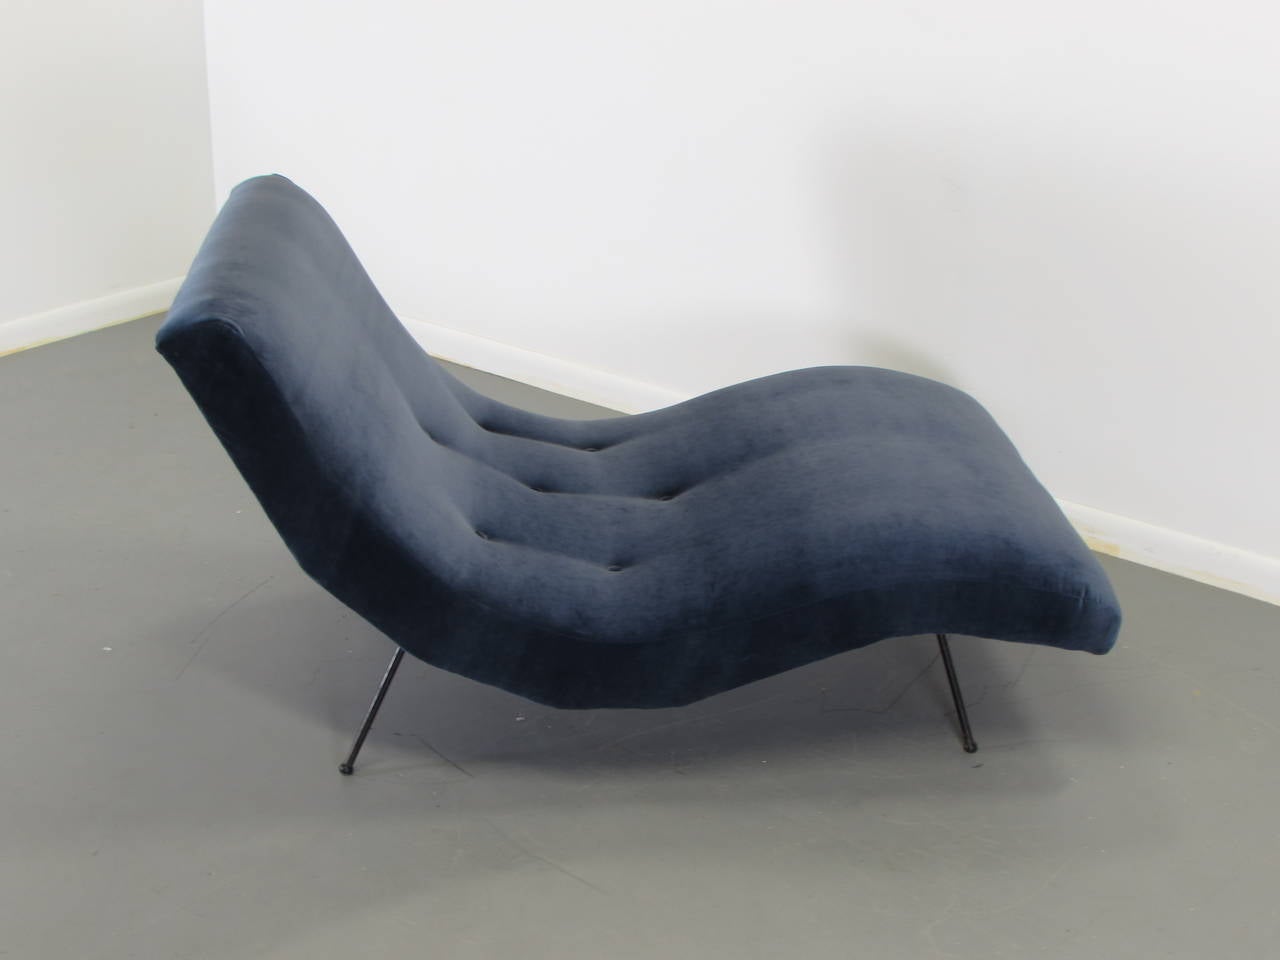 American Undulating Wave Chaise Lounge by Adrian Pearsall, Rare Iron Legs 1960s